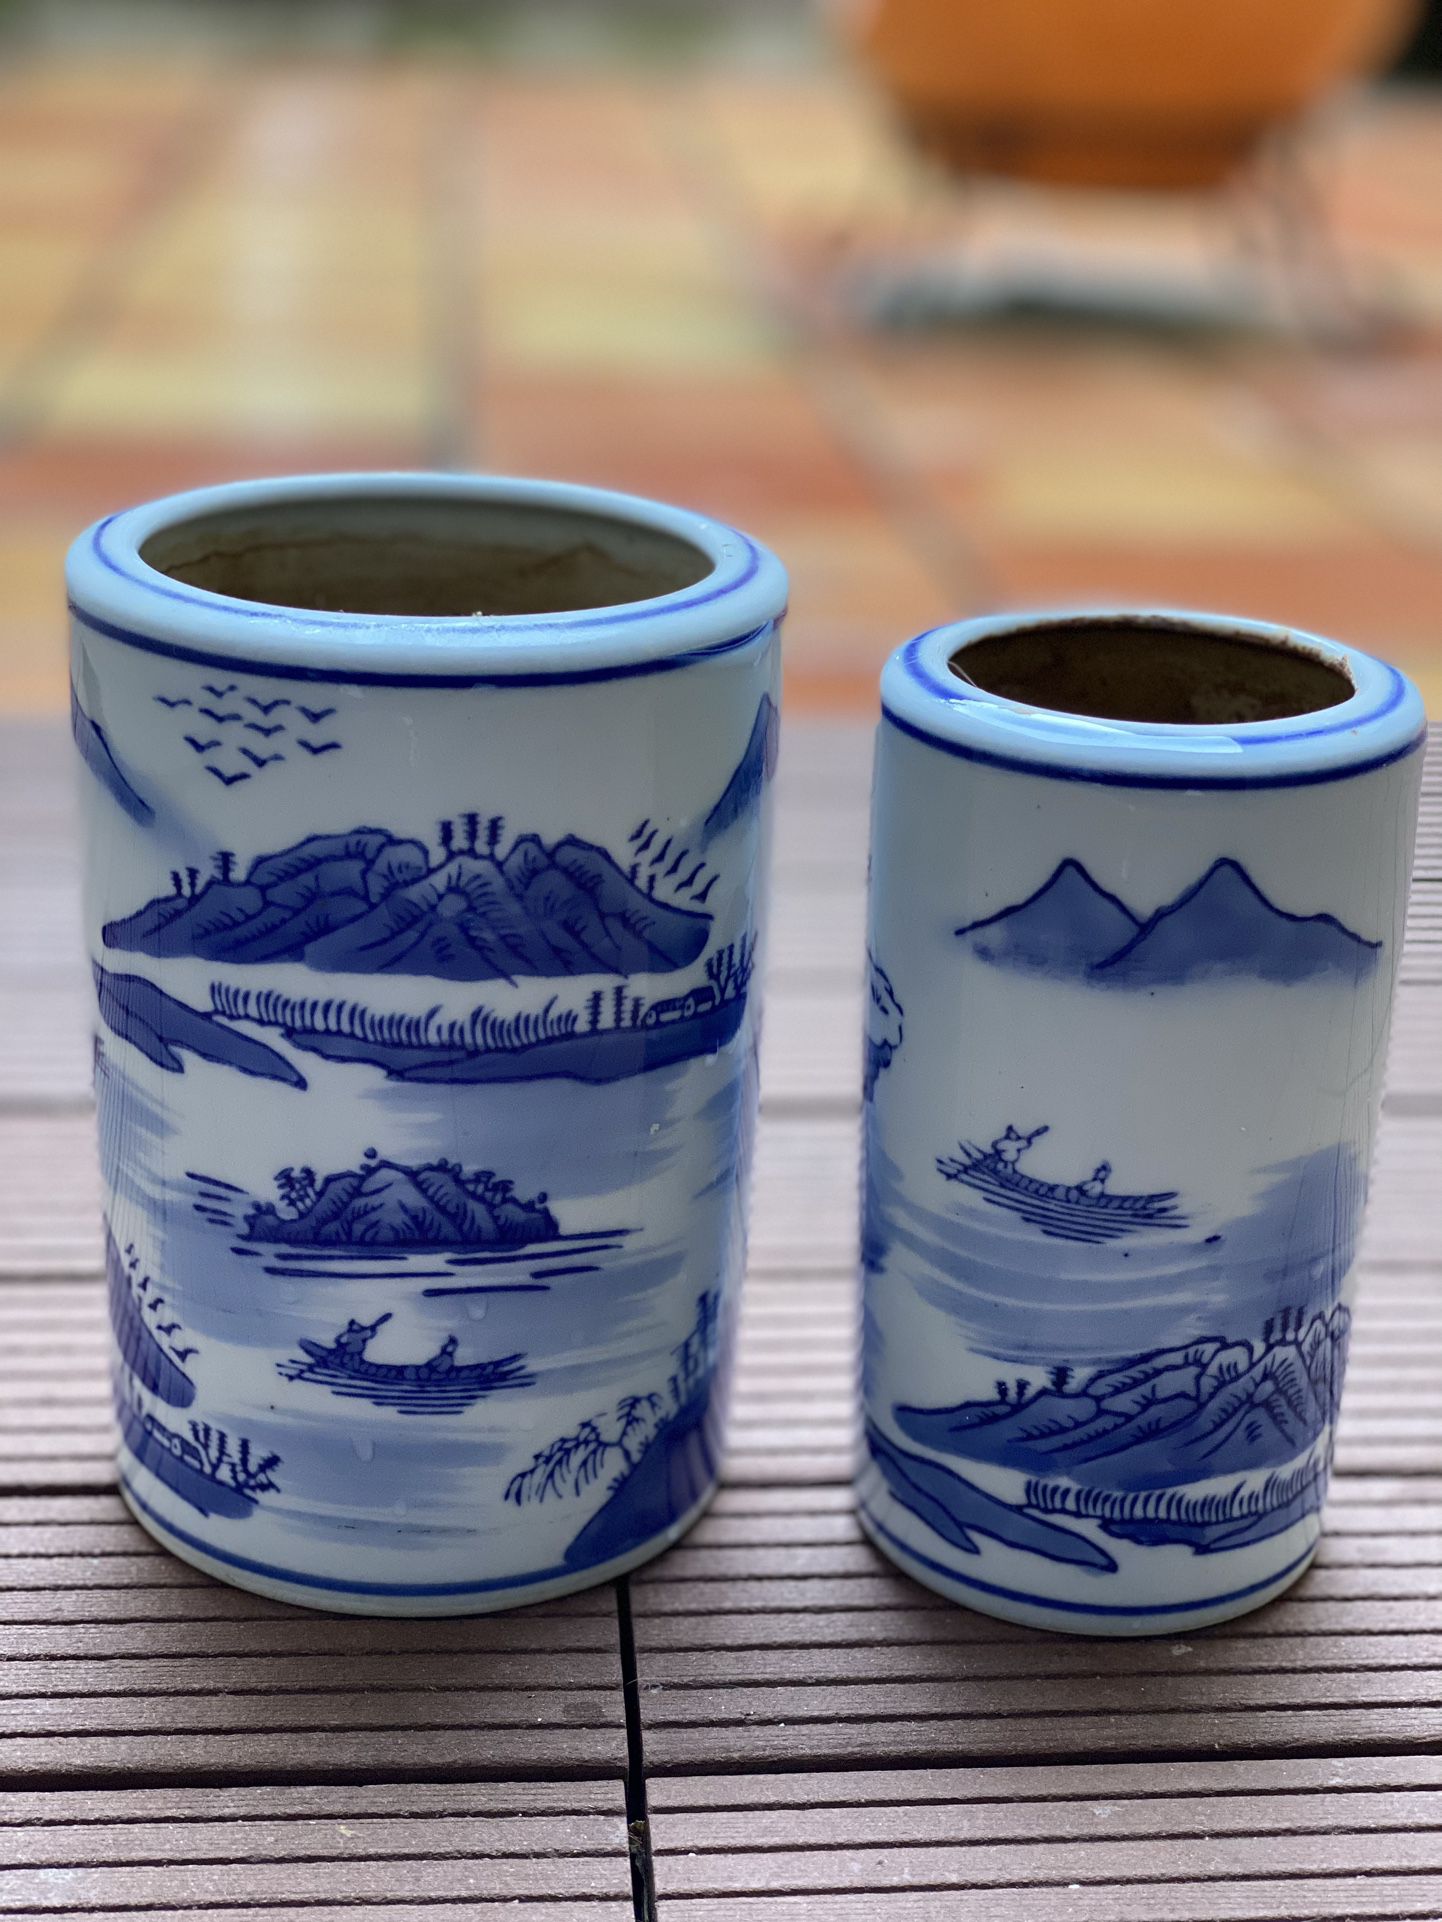 2 Chinese Landscape Painting Ceramic Vases In Blue And White Color